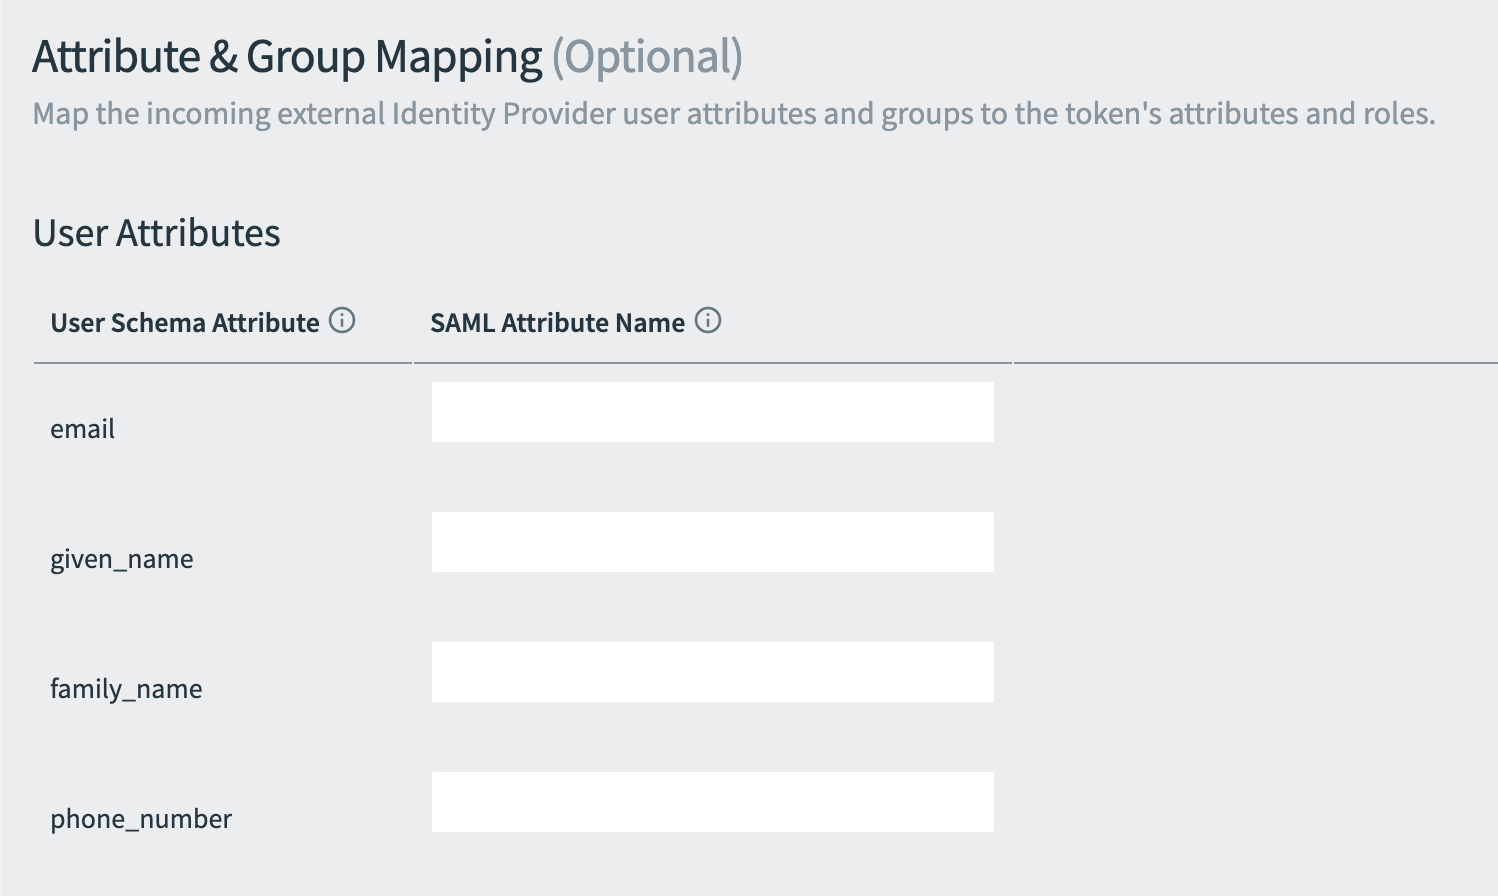 The Attribute & Group Mapping section. There are SAML Attribute Name fields for email, given name, family name, and phone number.